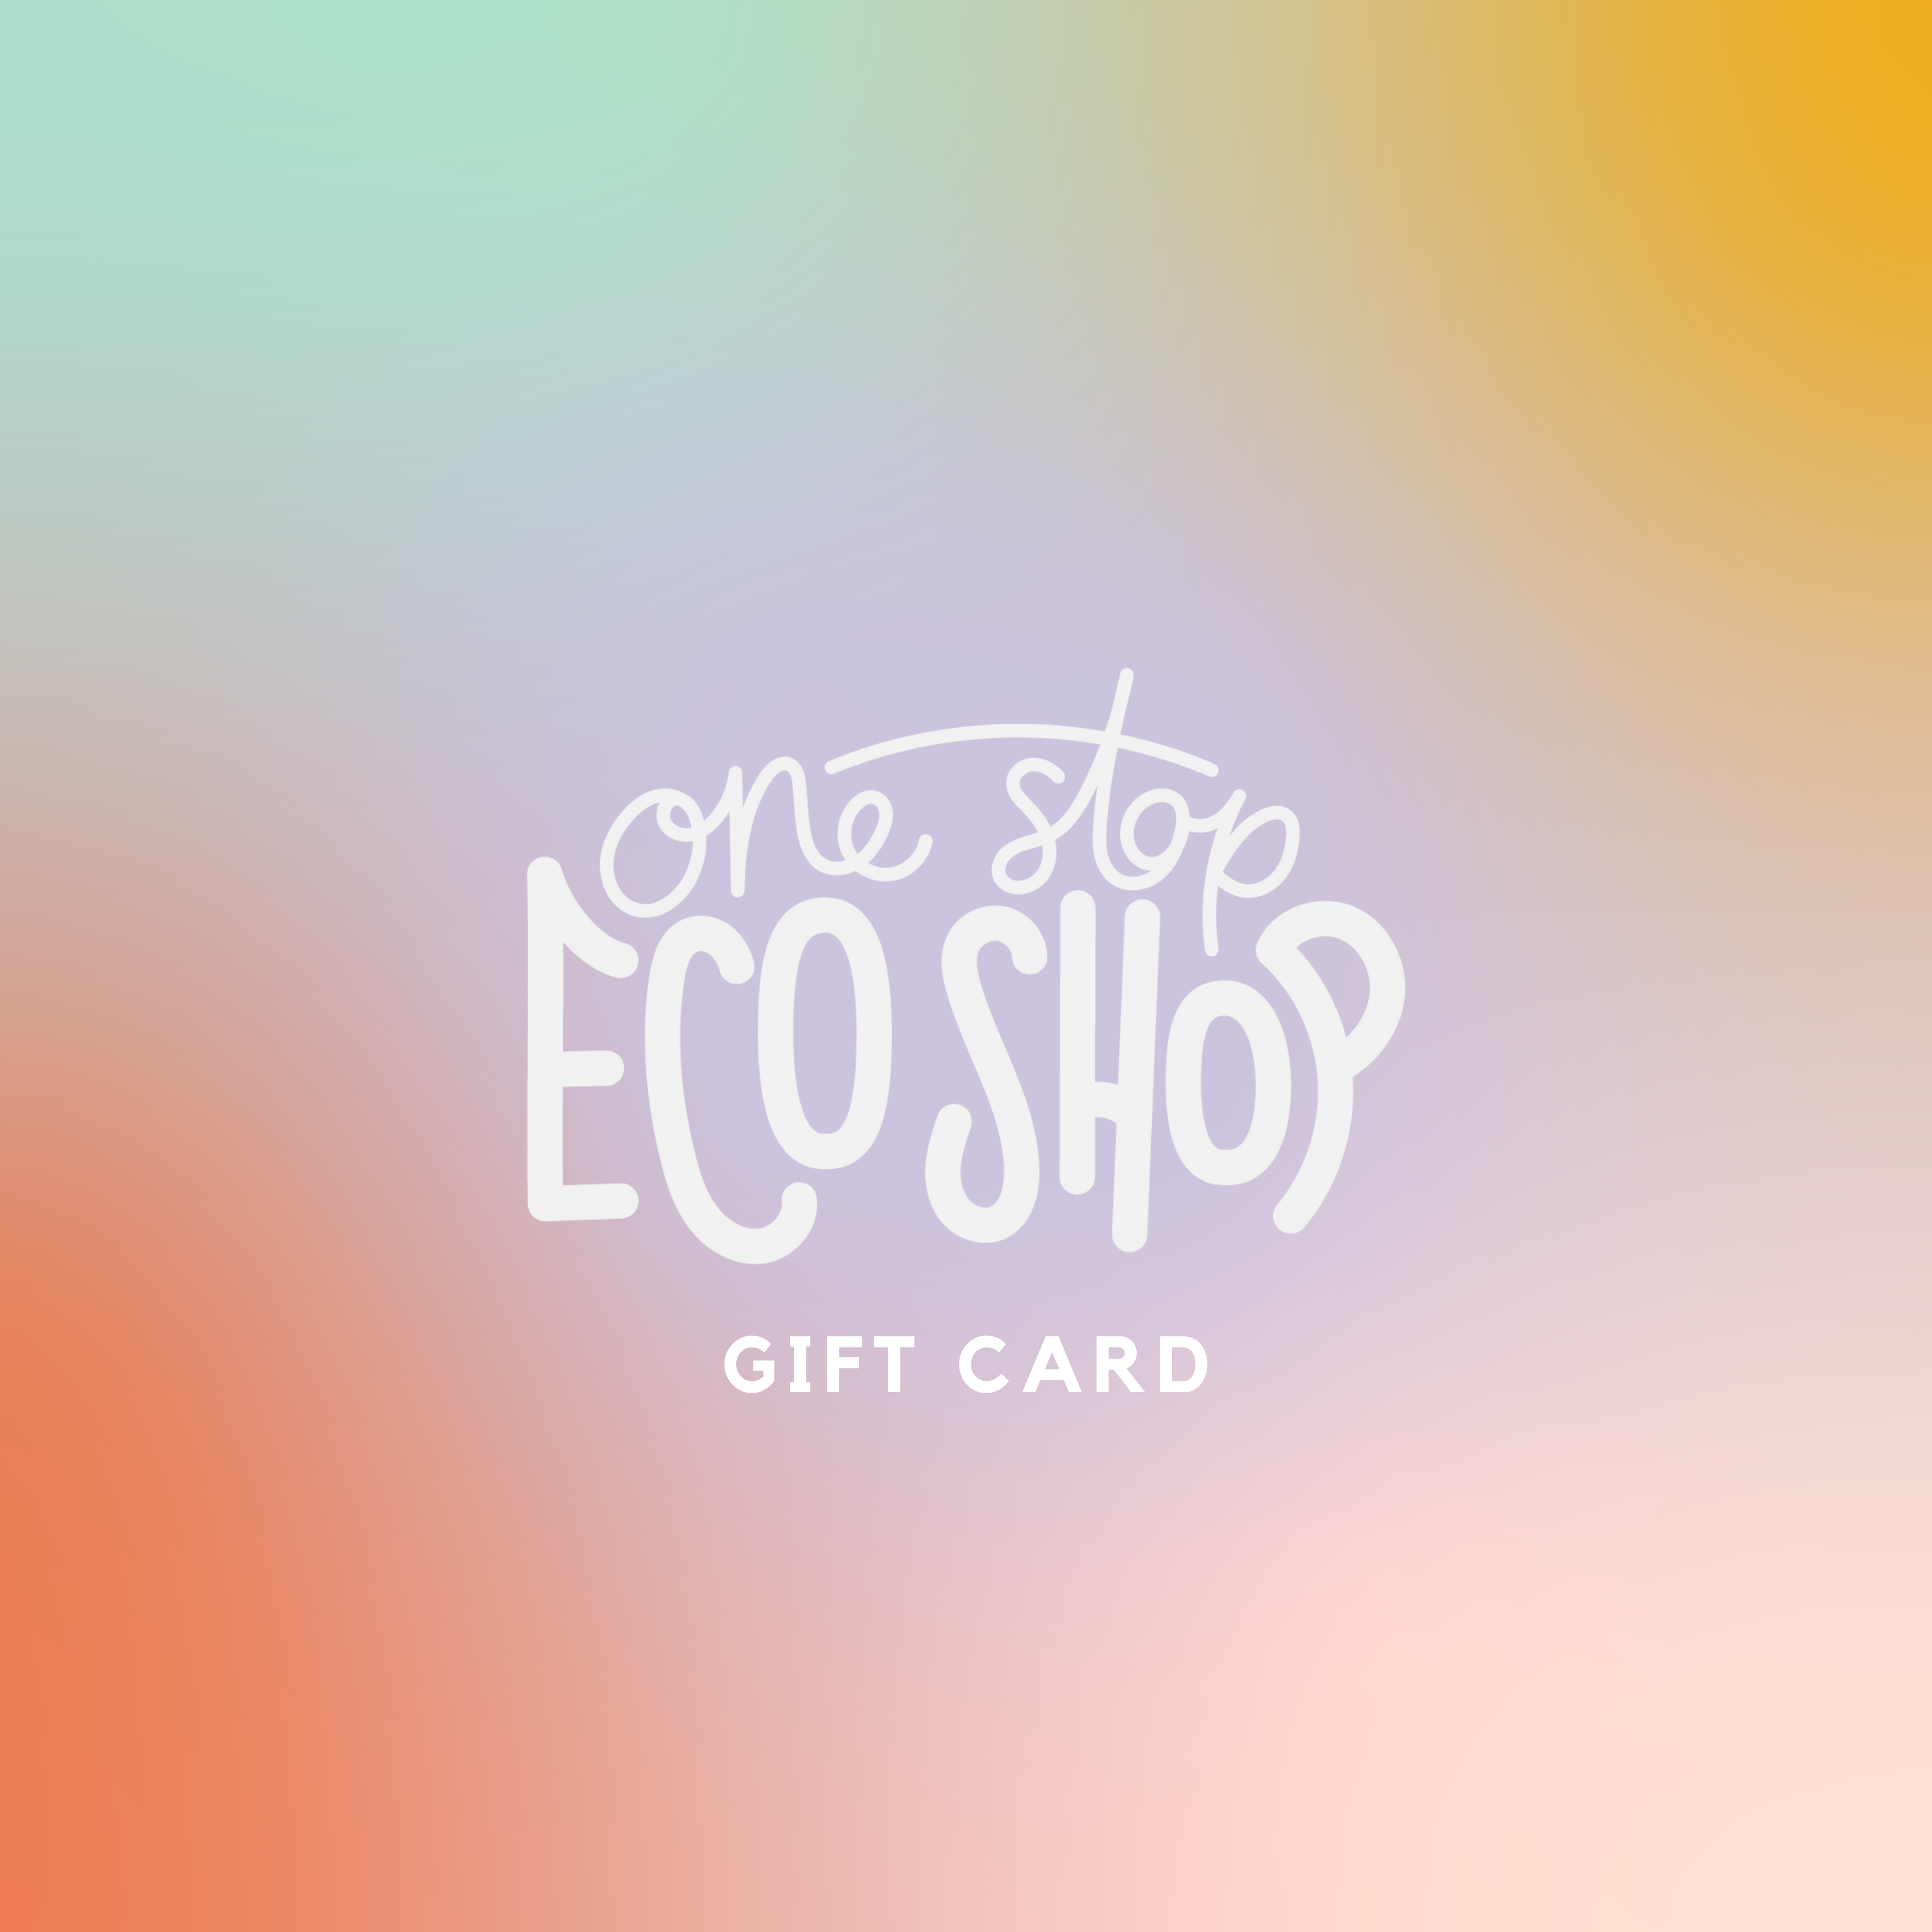 One Stop Eco Shop Gift Card